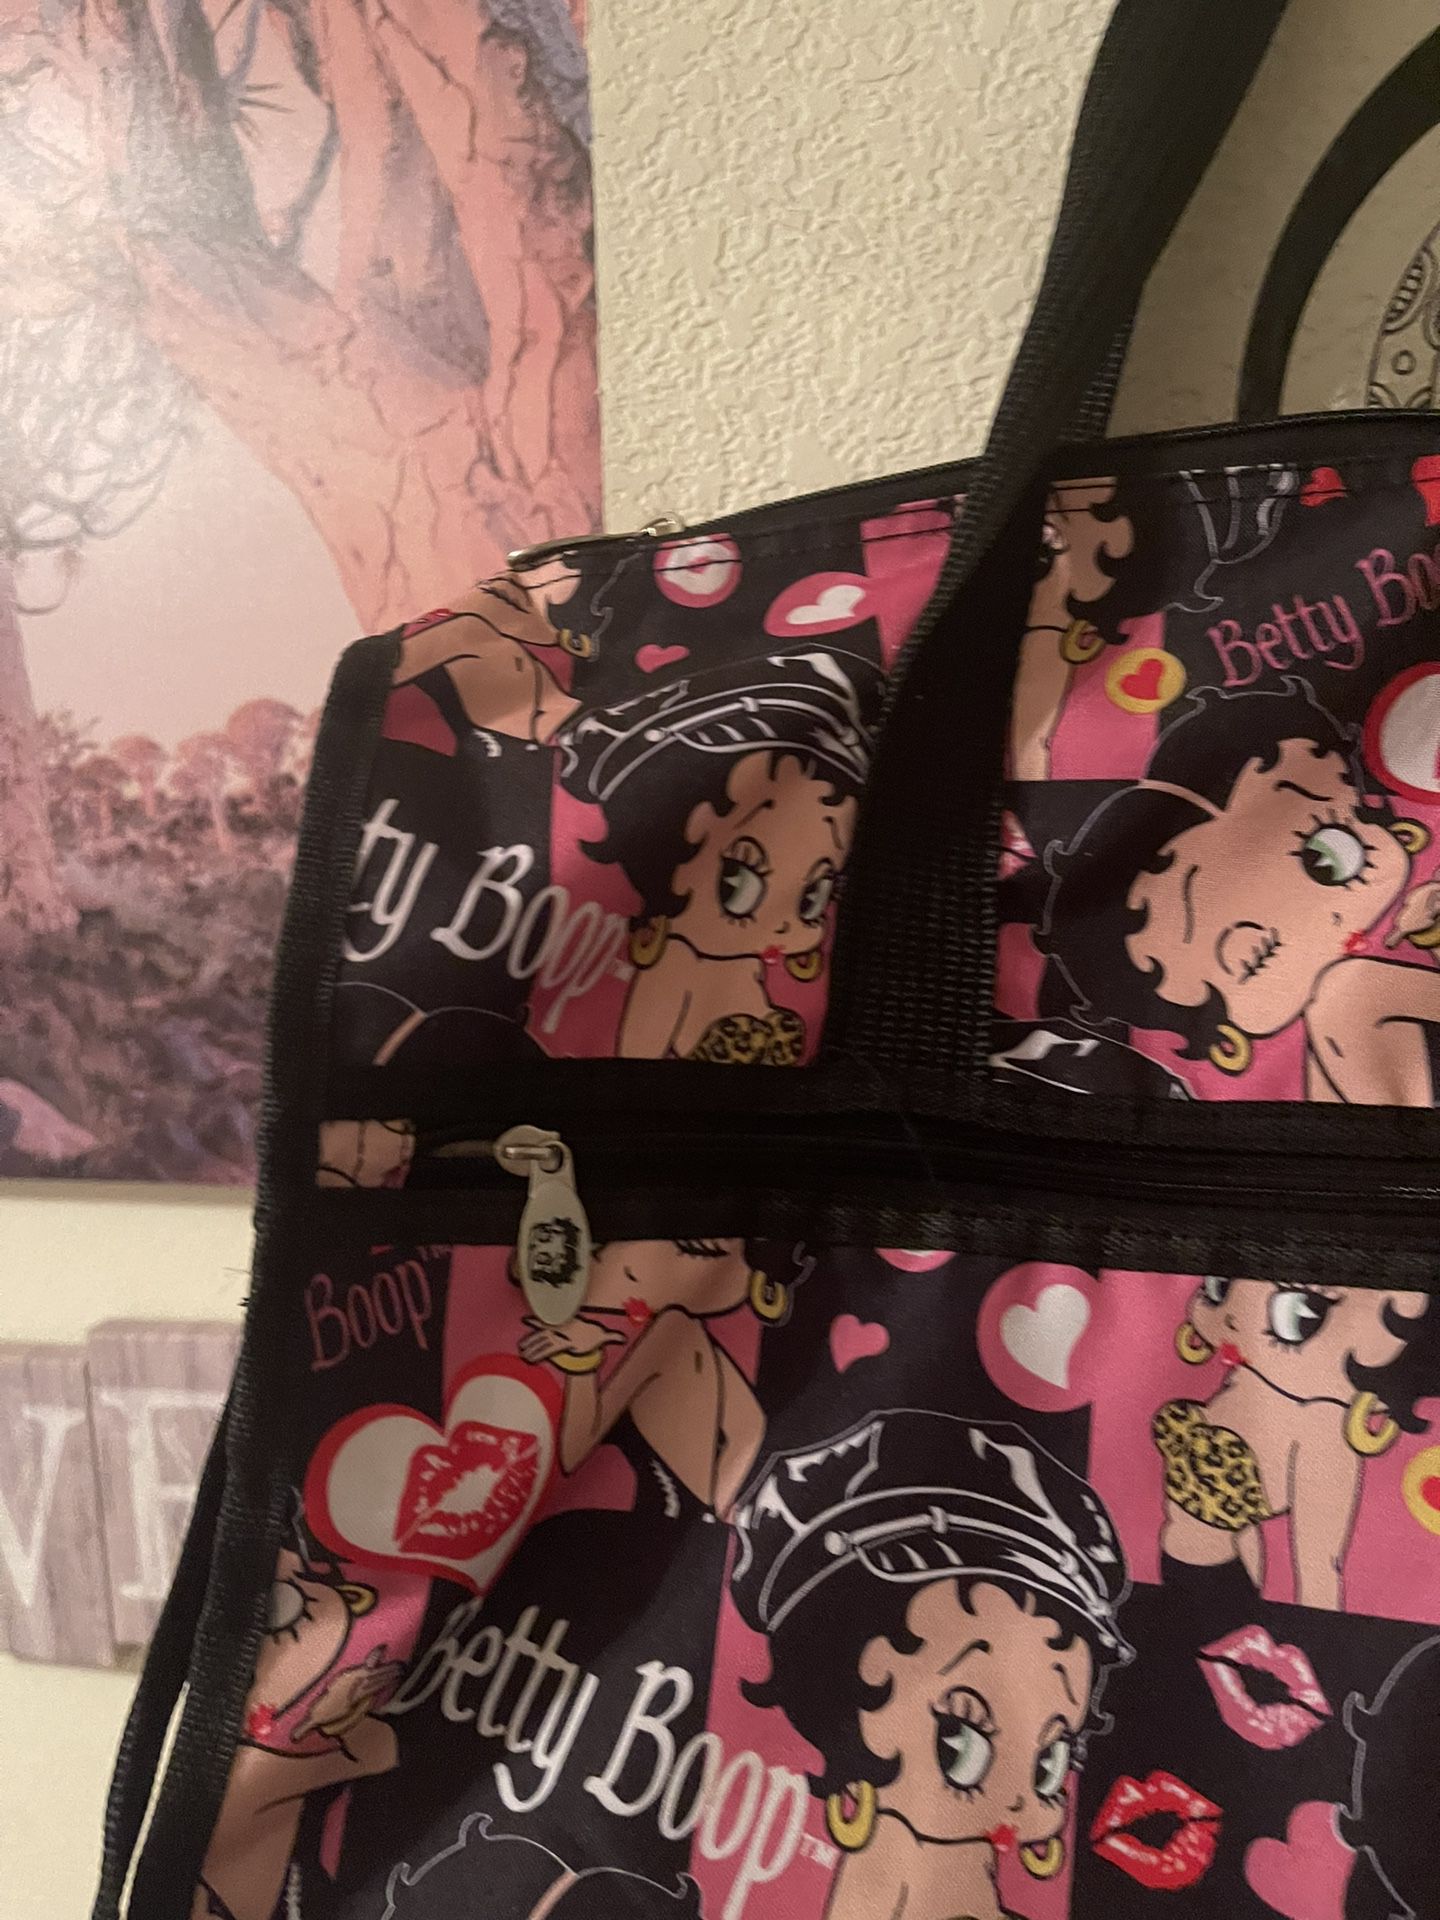 BETTY BOOP Pink Gym Tote Duffle BAG Side Pockets